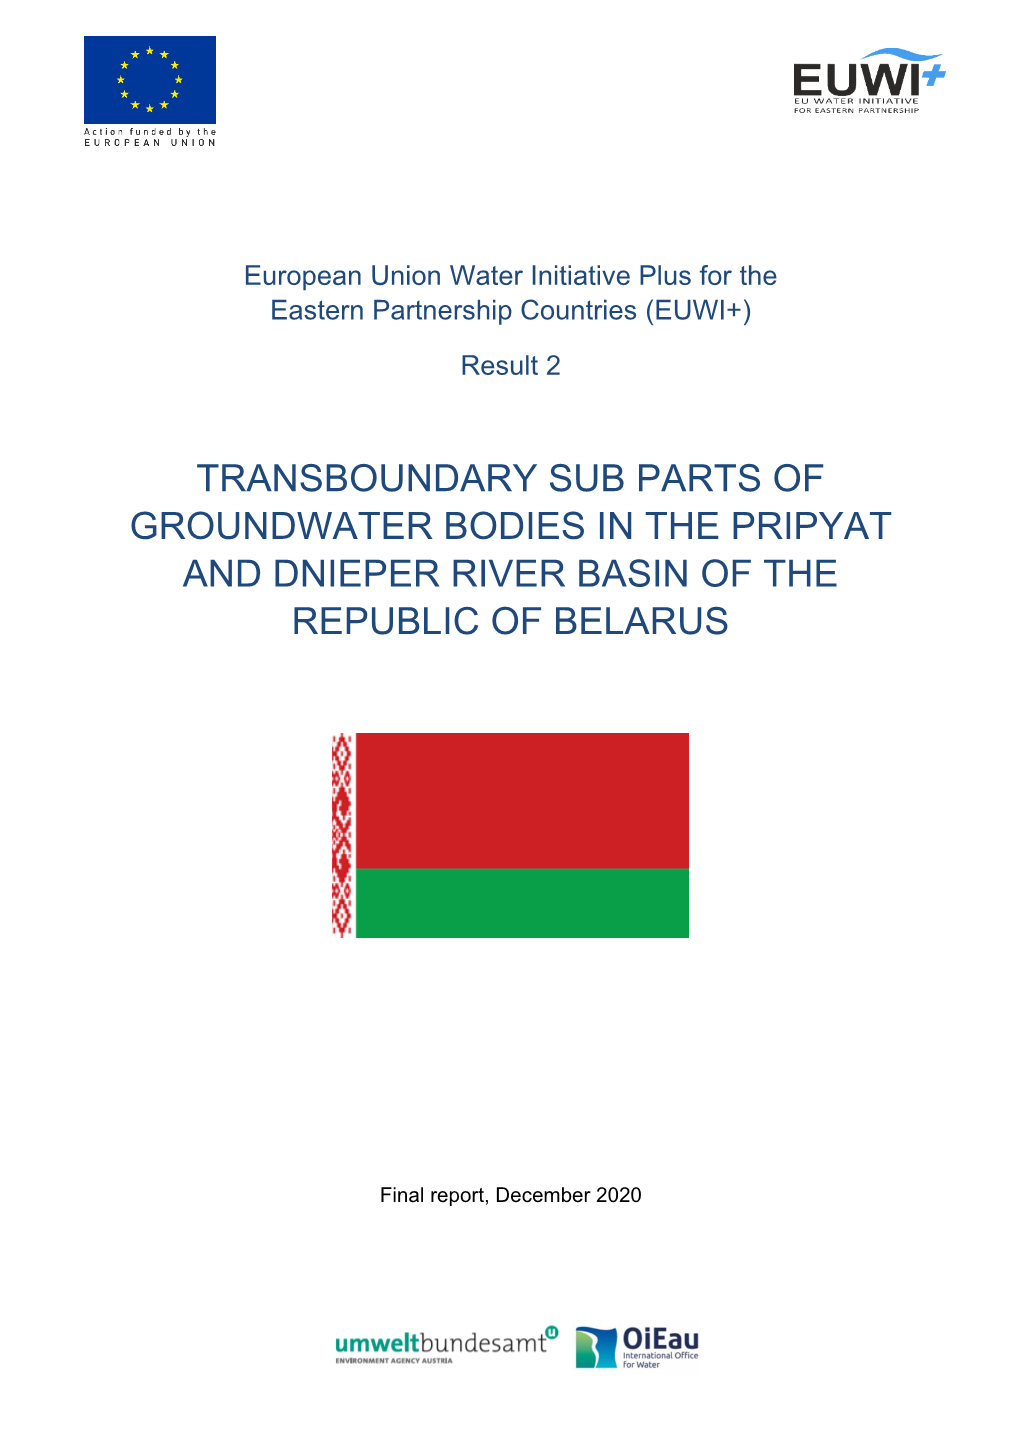 Transboundary Sub Parts of Groundwater Bodies in the Pripyat and Dnieper River Basin of the Republic of Belarus